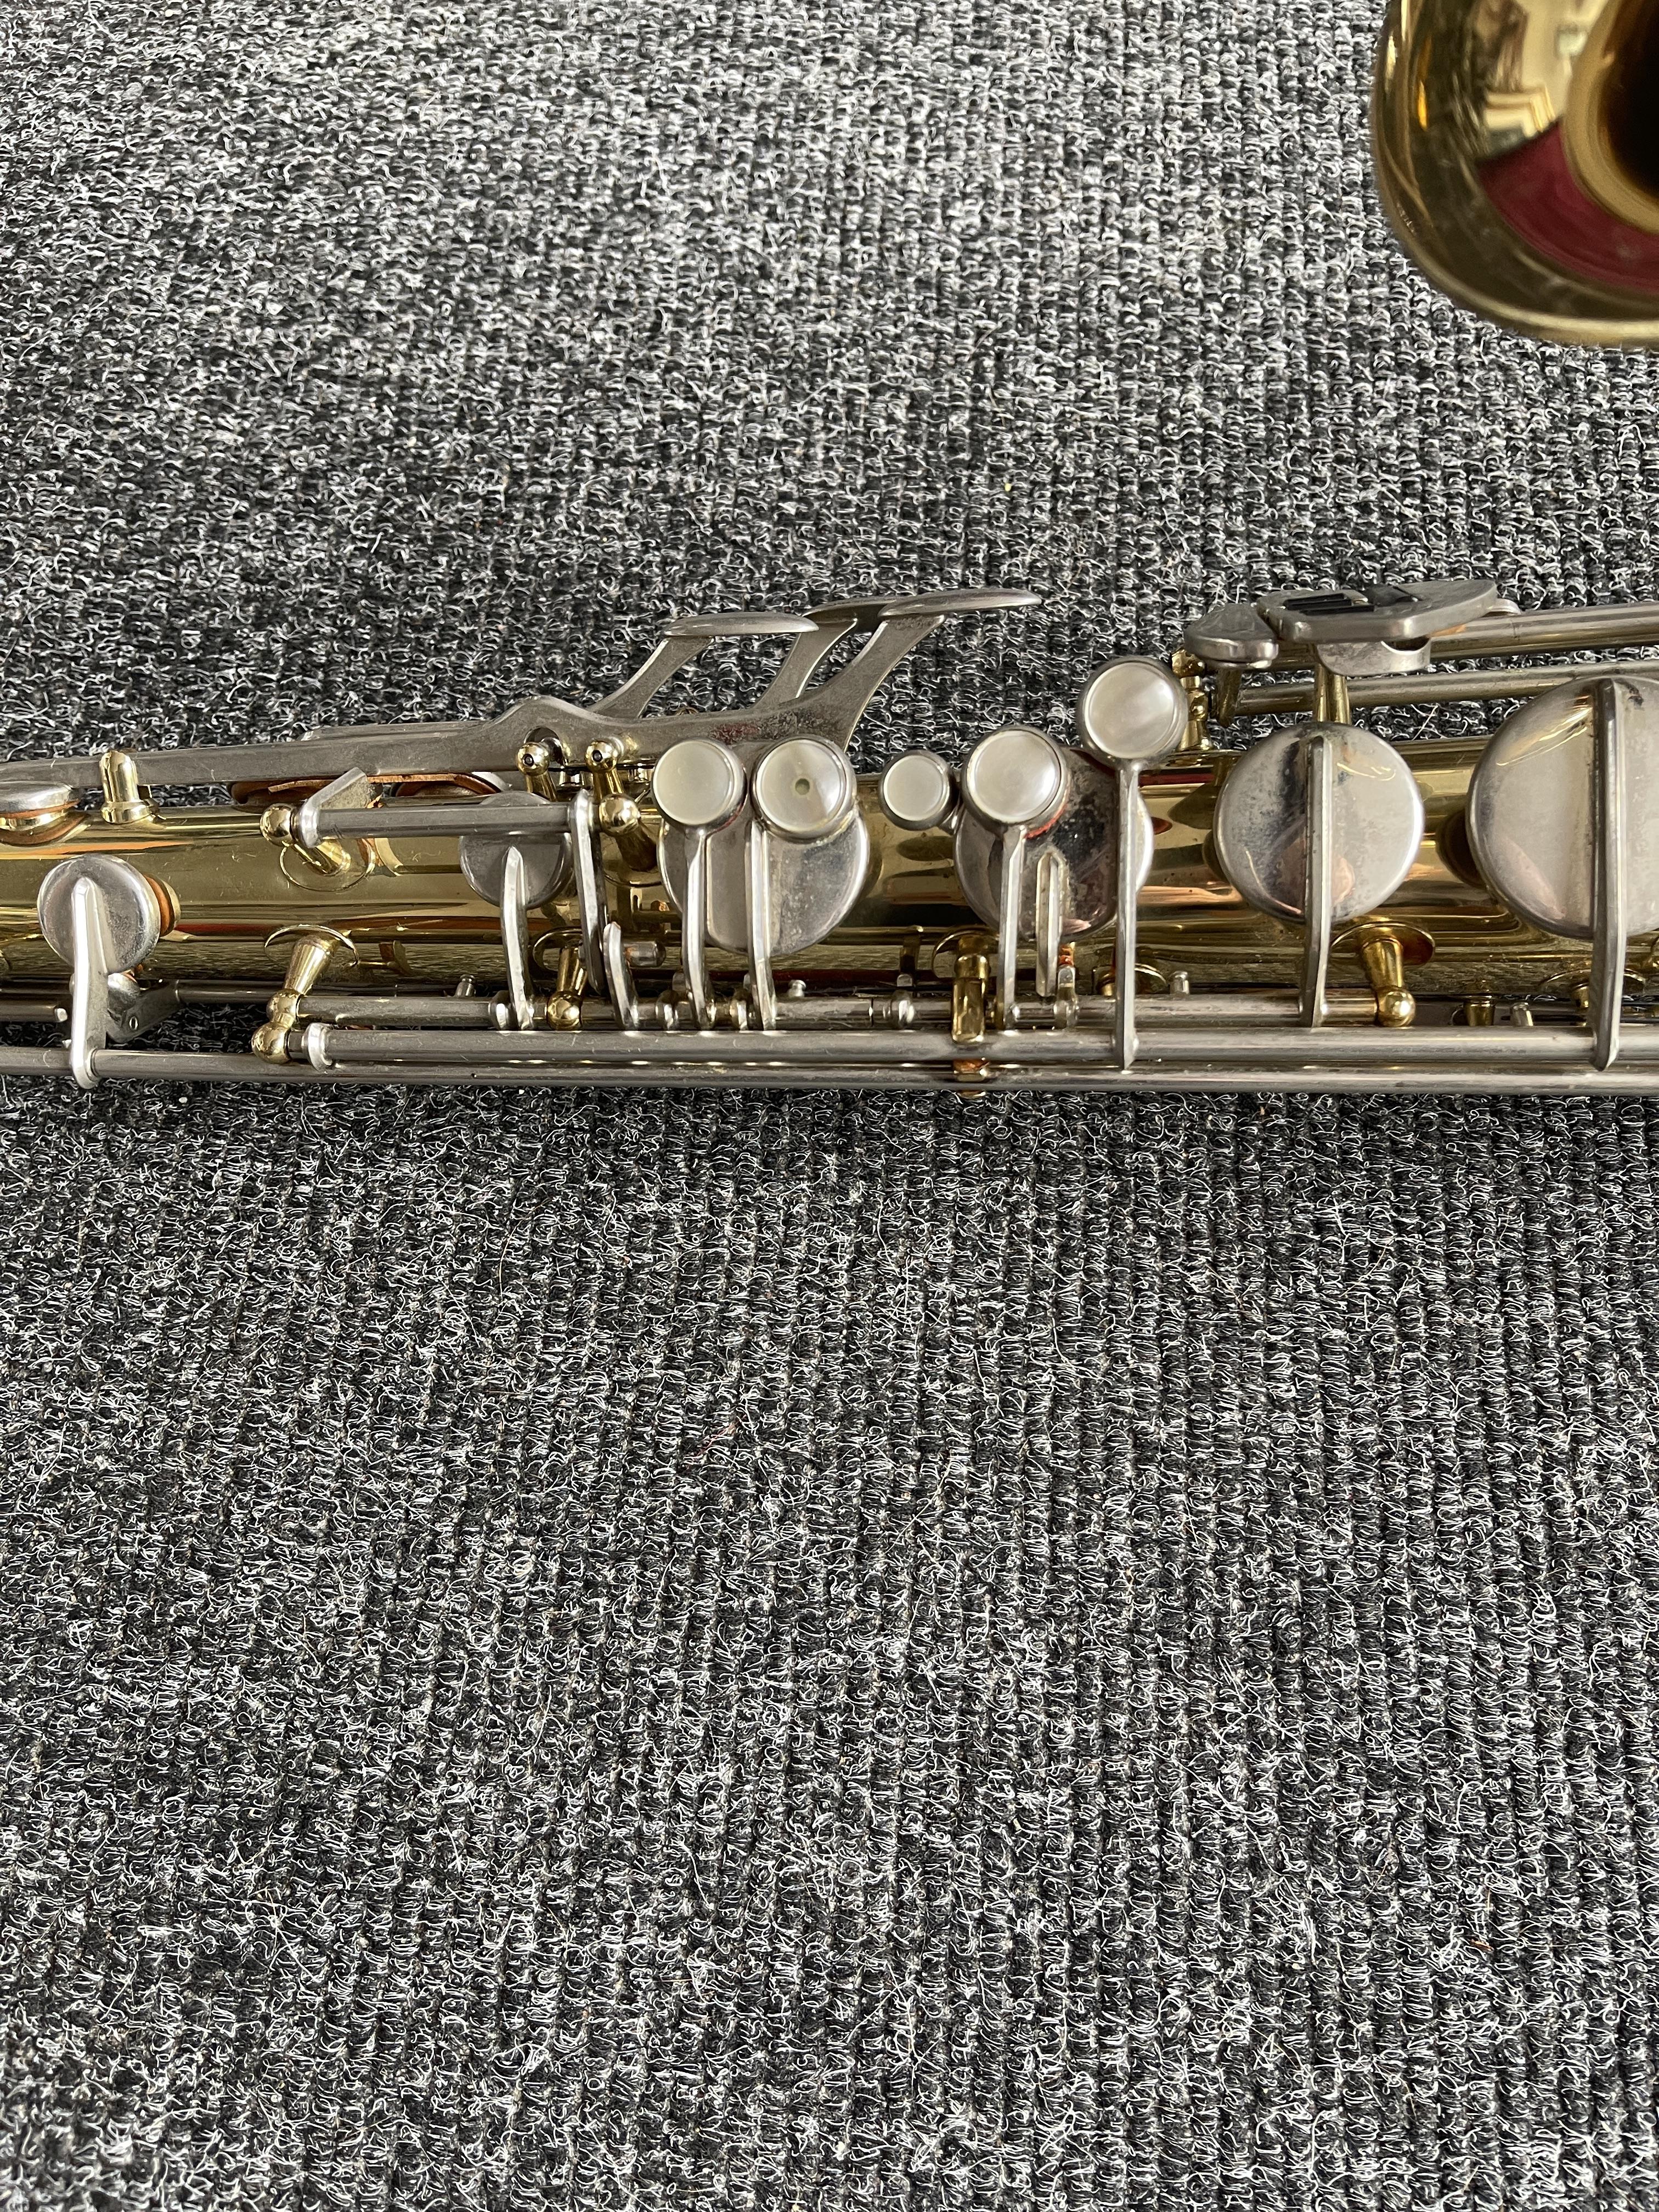 B&H 400 made for Boosey & Hawkes Cased Saxophone. - Image 19 of 31